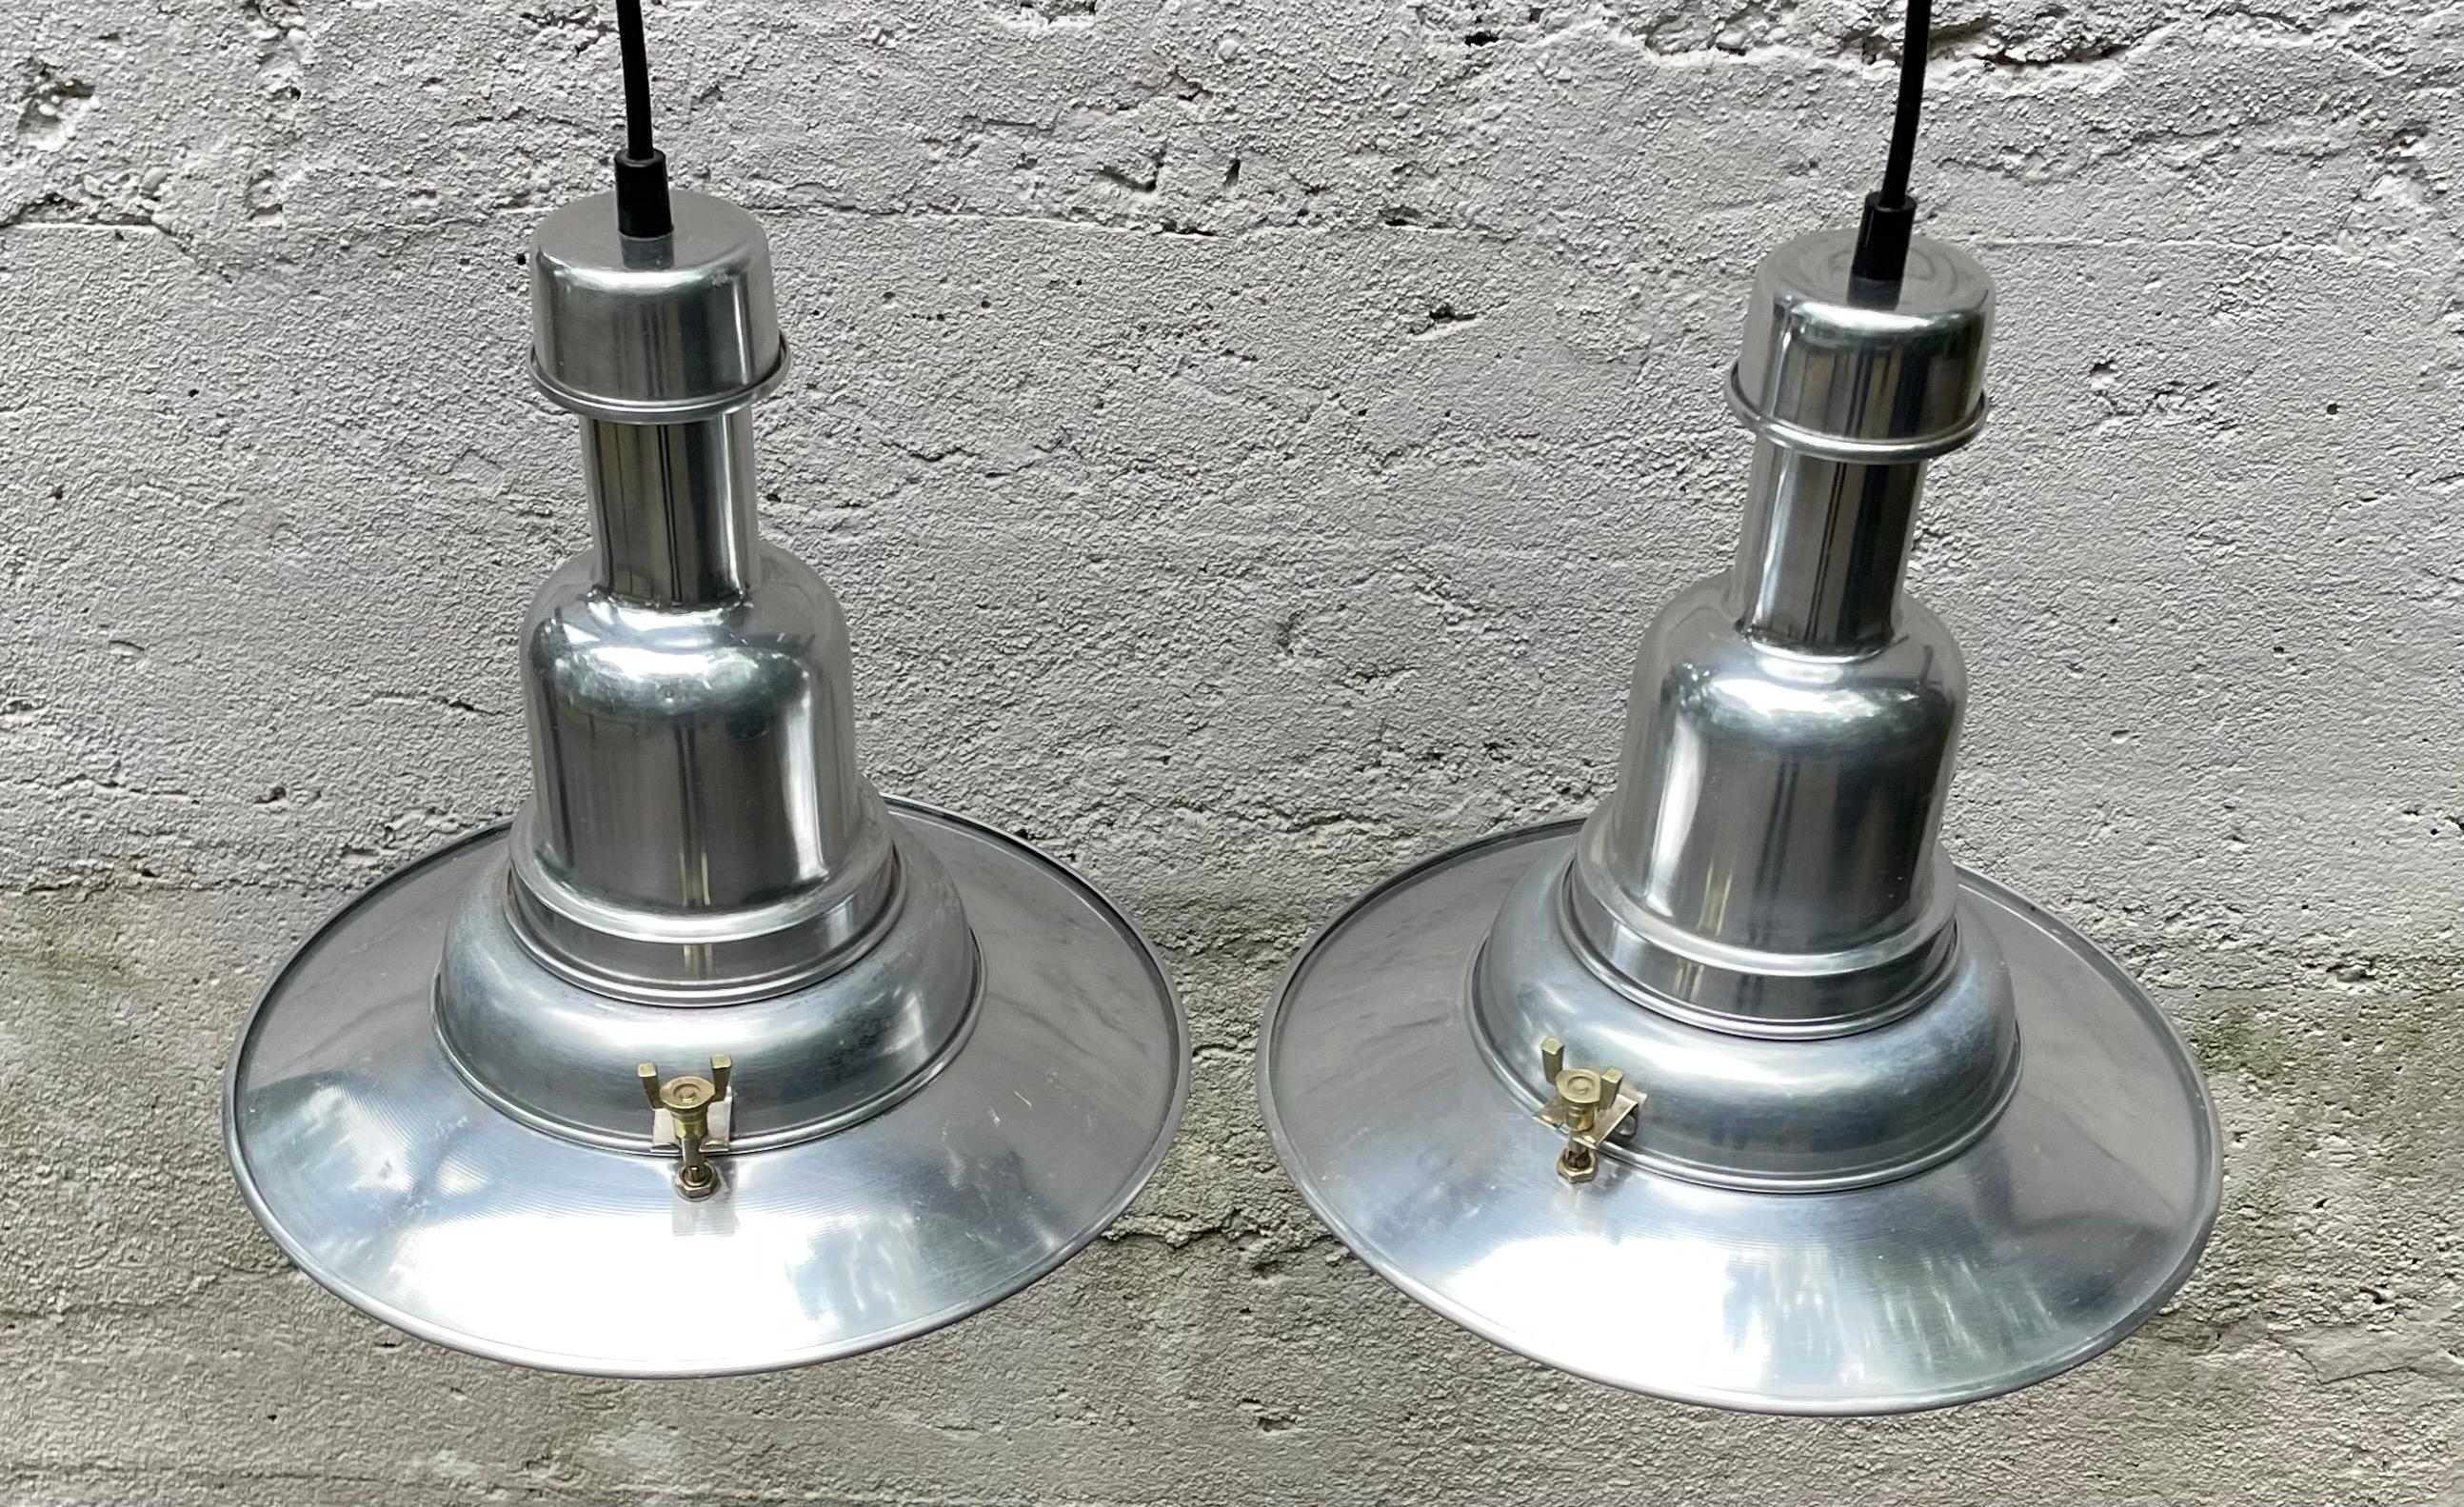 Amazing pair of Mid-Century Modern aluminum pendant lights, super high quality and authentic. Beautiful detailing with brass accent attachments.